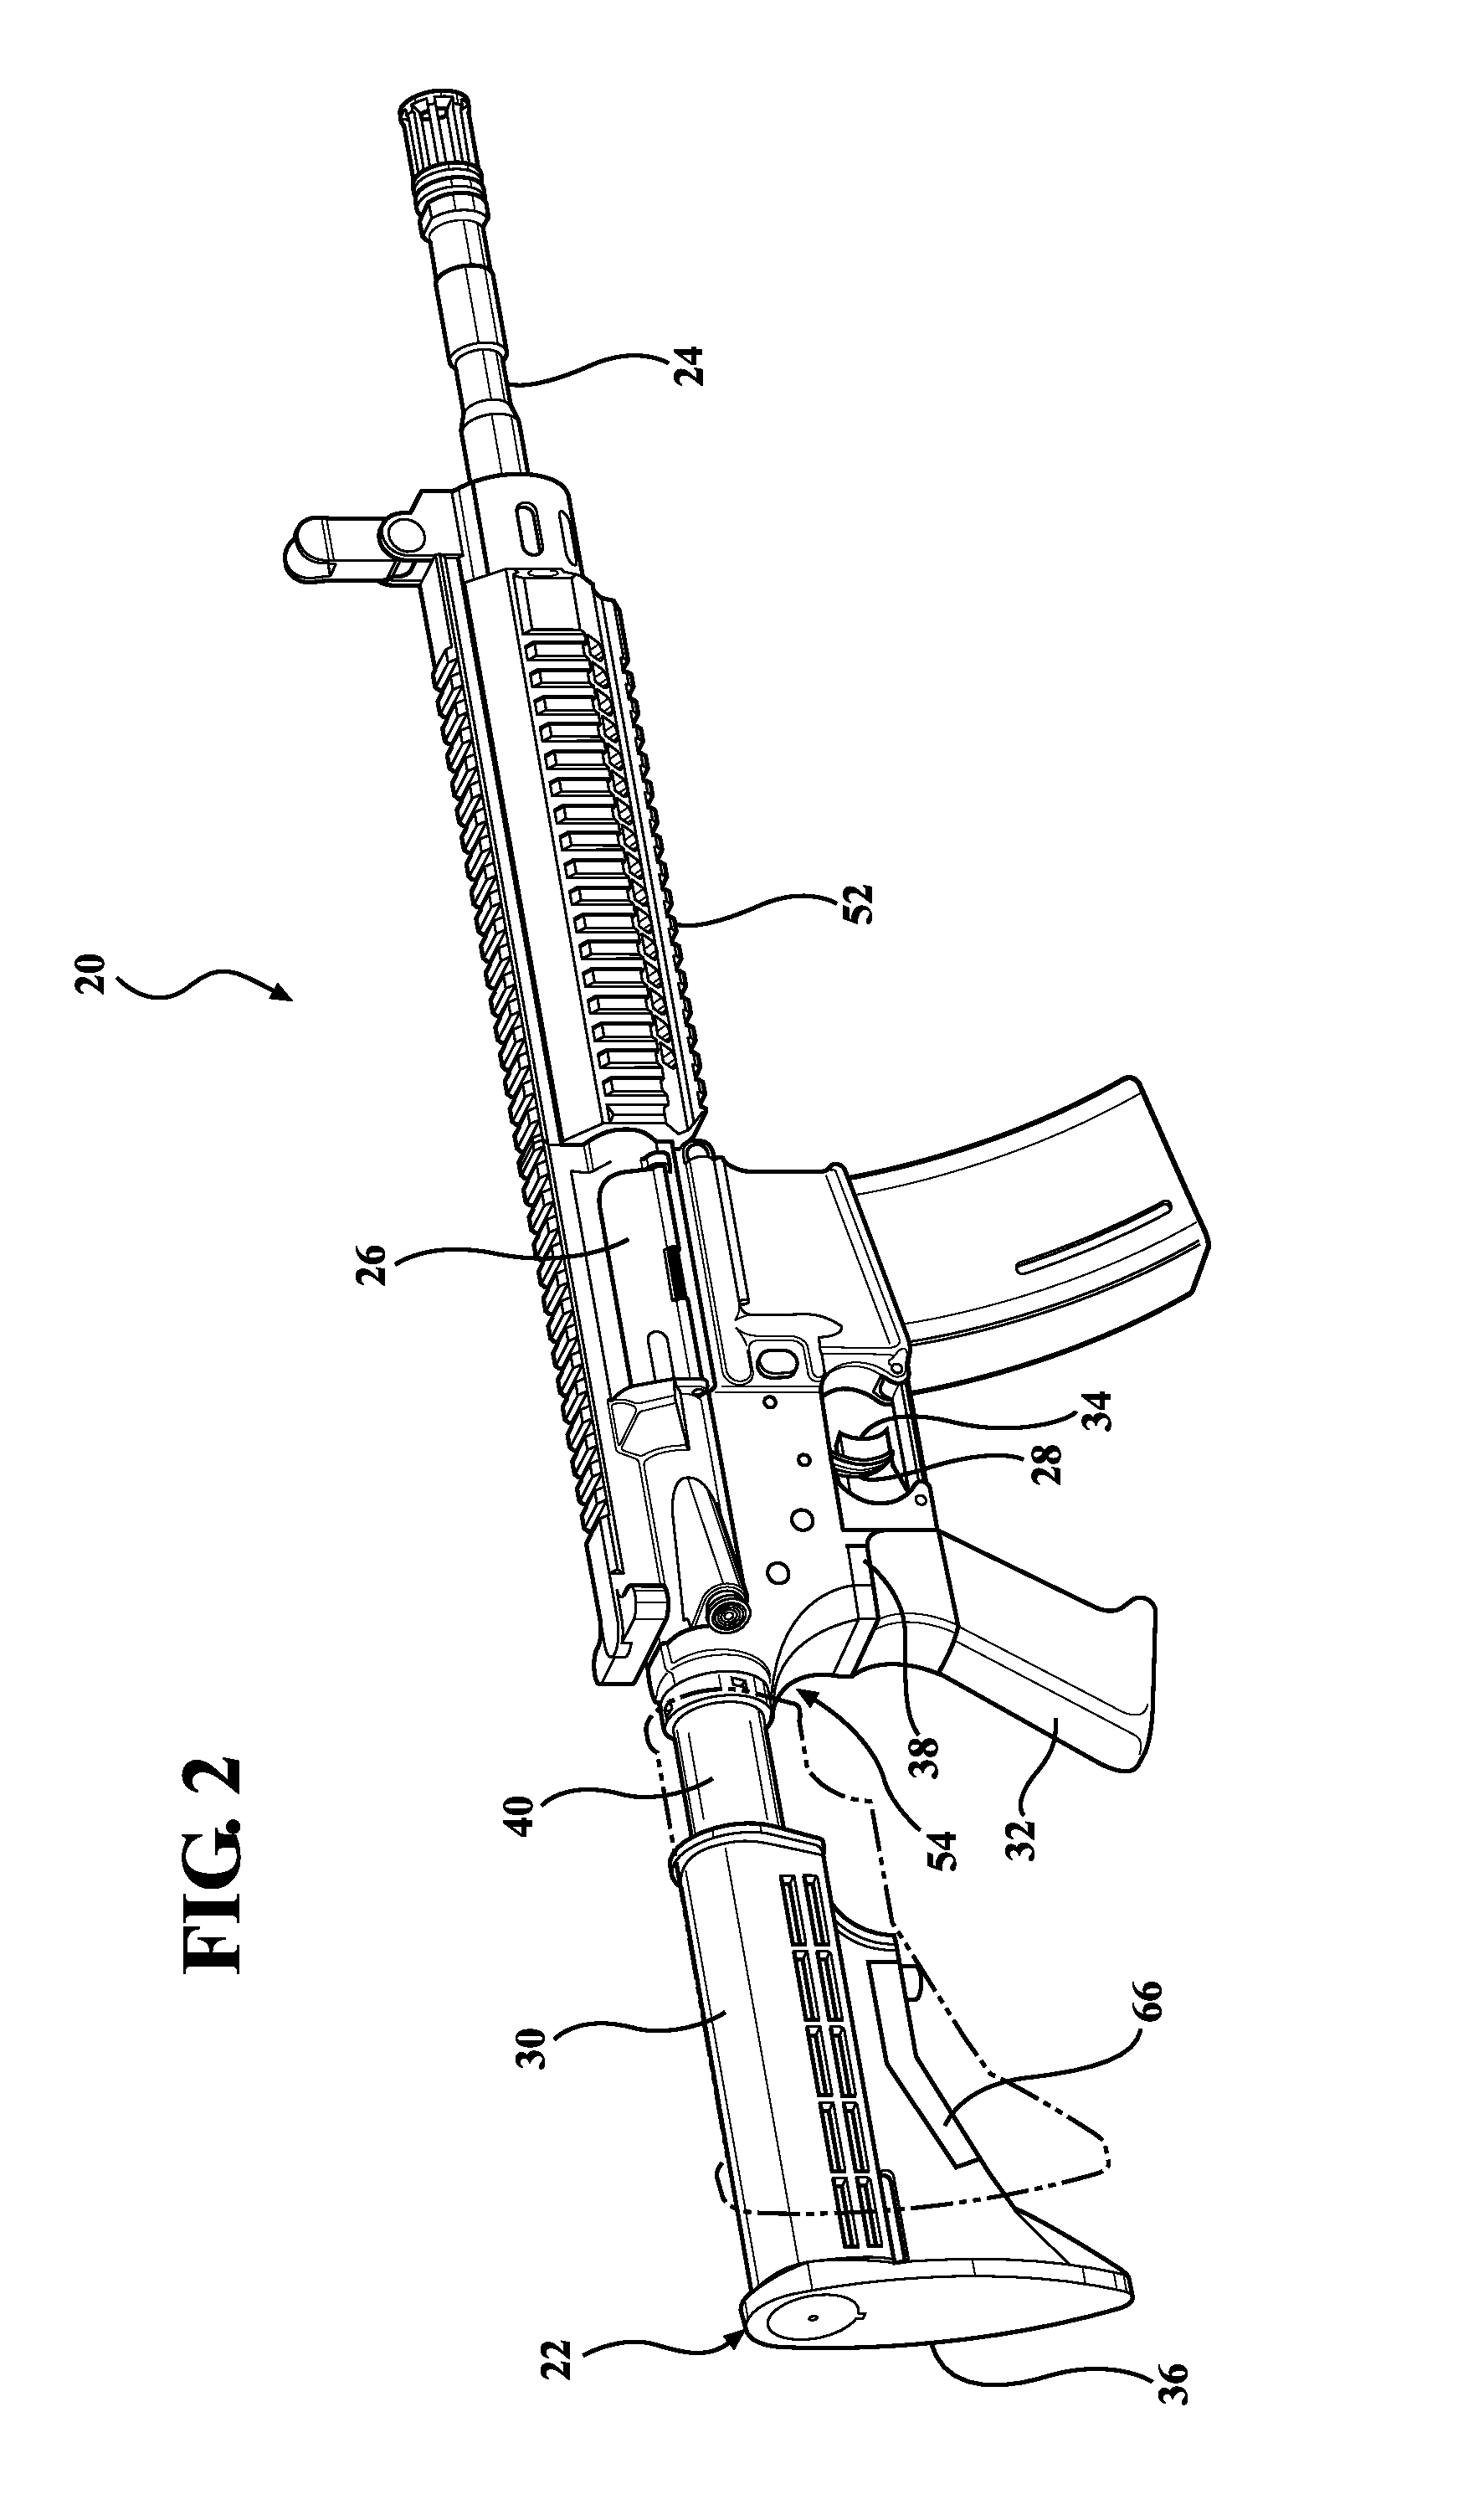 Adjustable slide-action stock for firearms